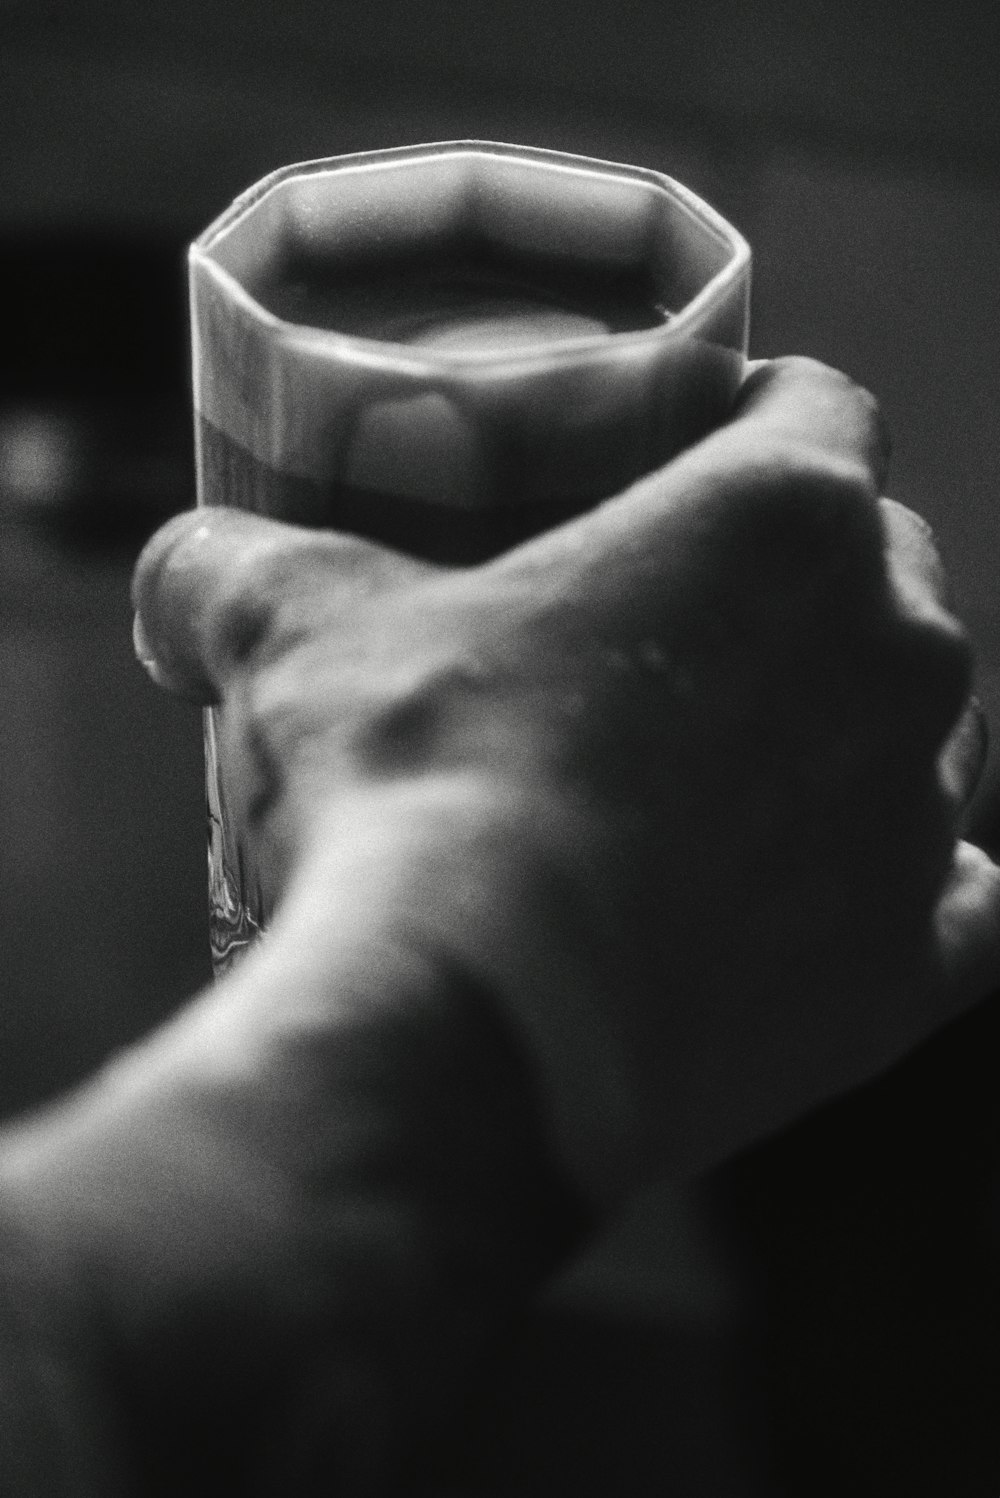 a black and white photo of a person holding a glass